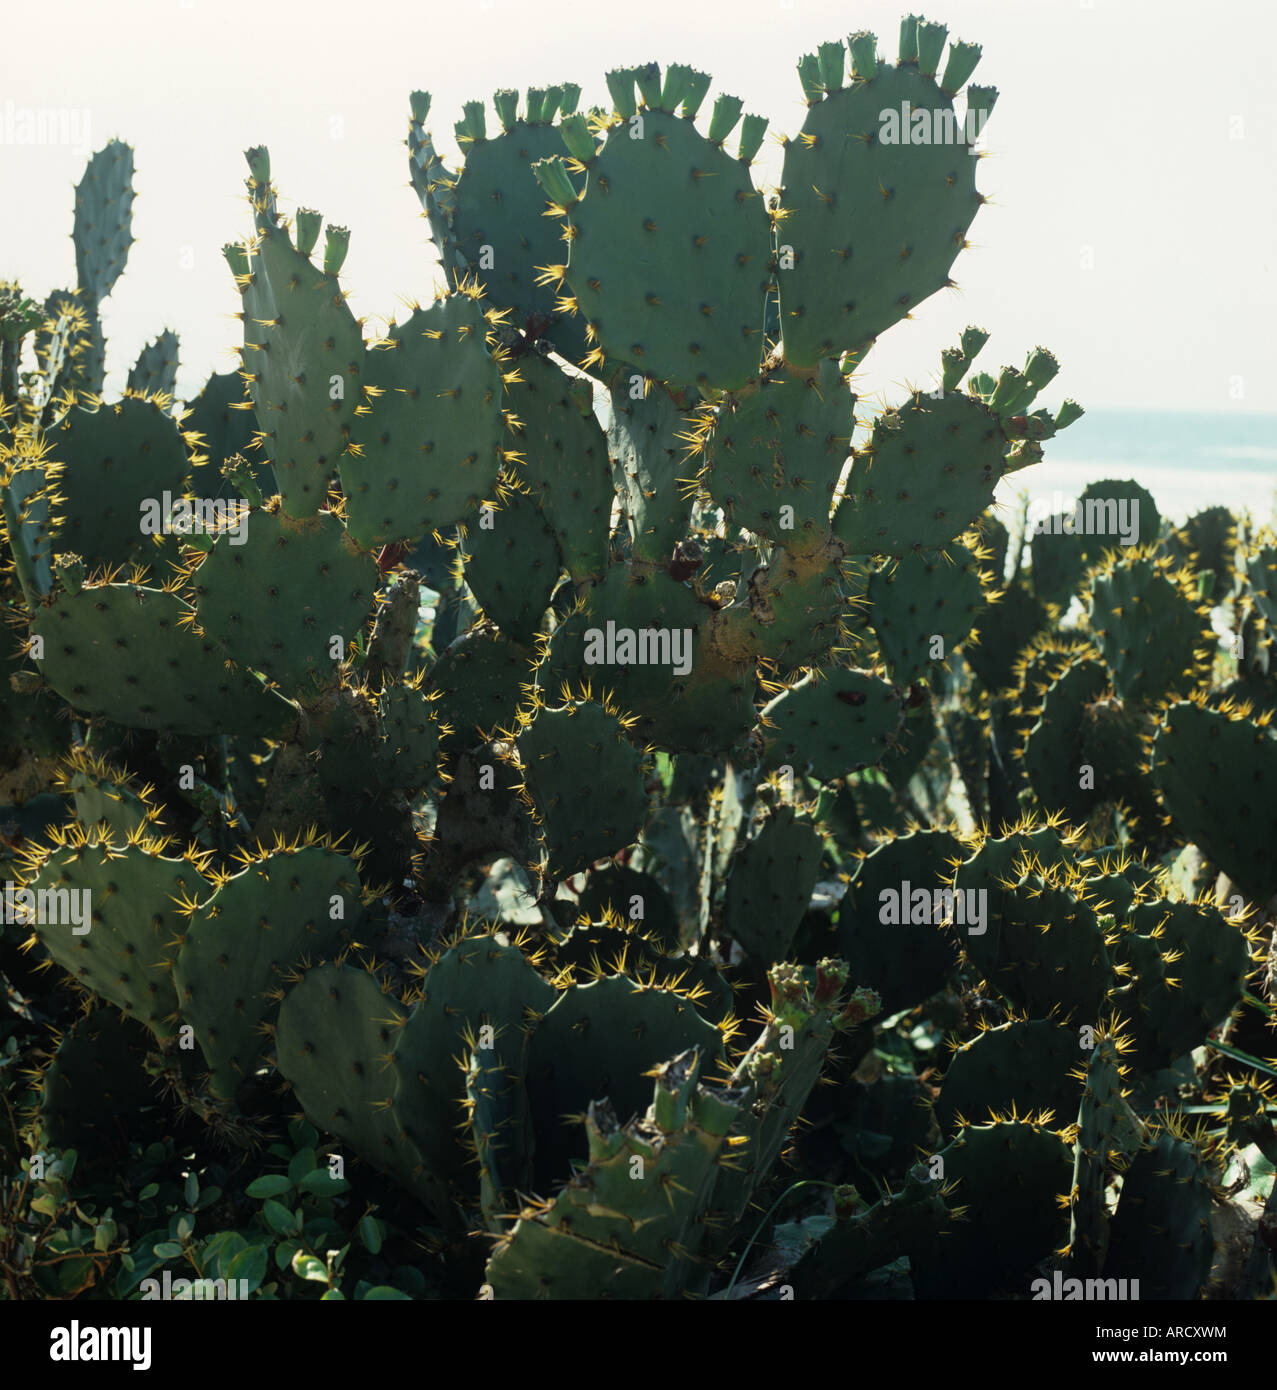 Back lit cactus plant prickly pear or barbary fig Opuntia ficus indica Florida USA Stock Photo